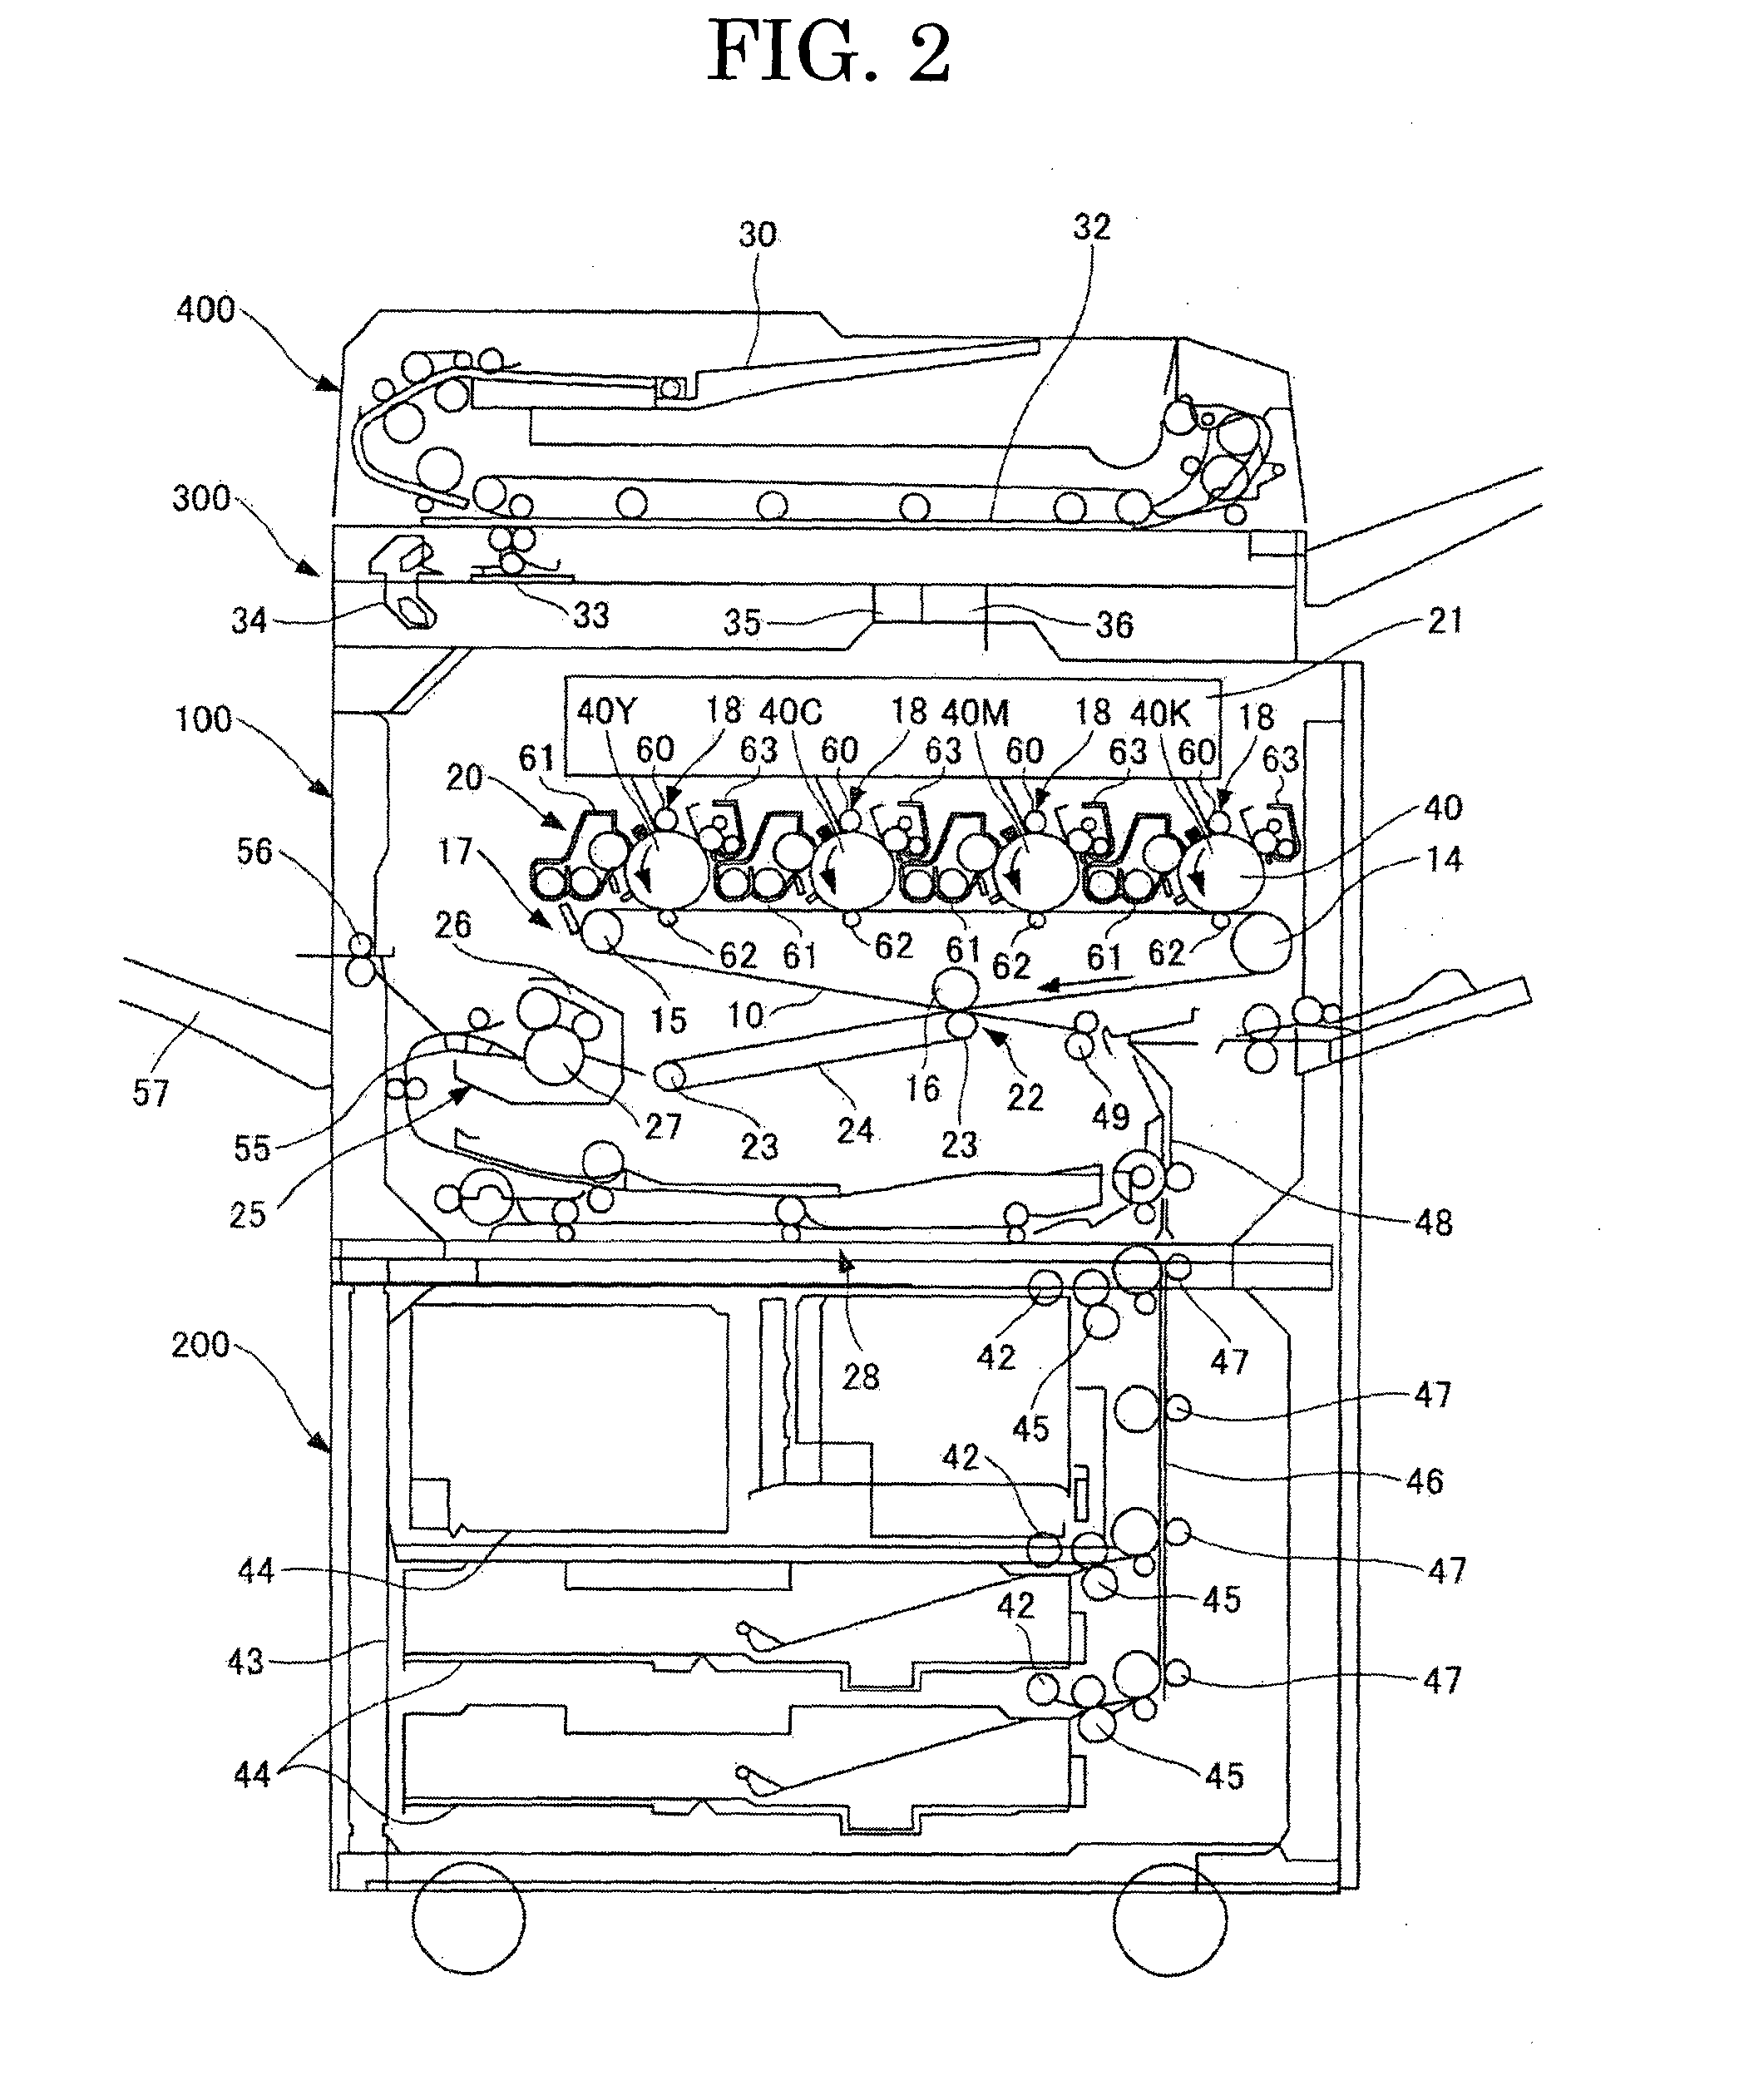 Resin composition for toner, toner, developer and image forming apparatus